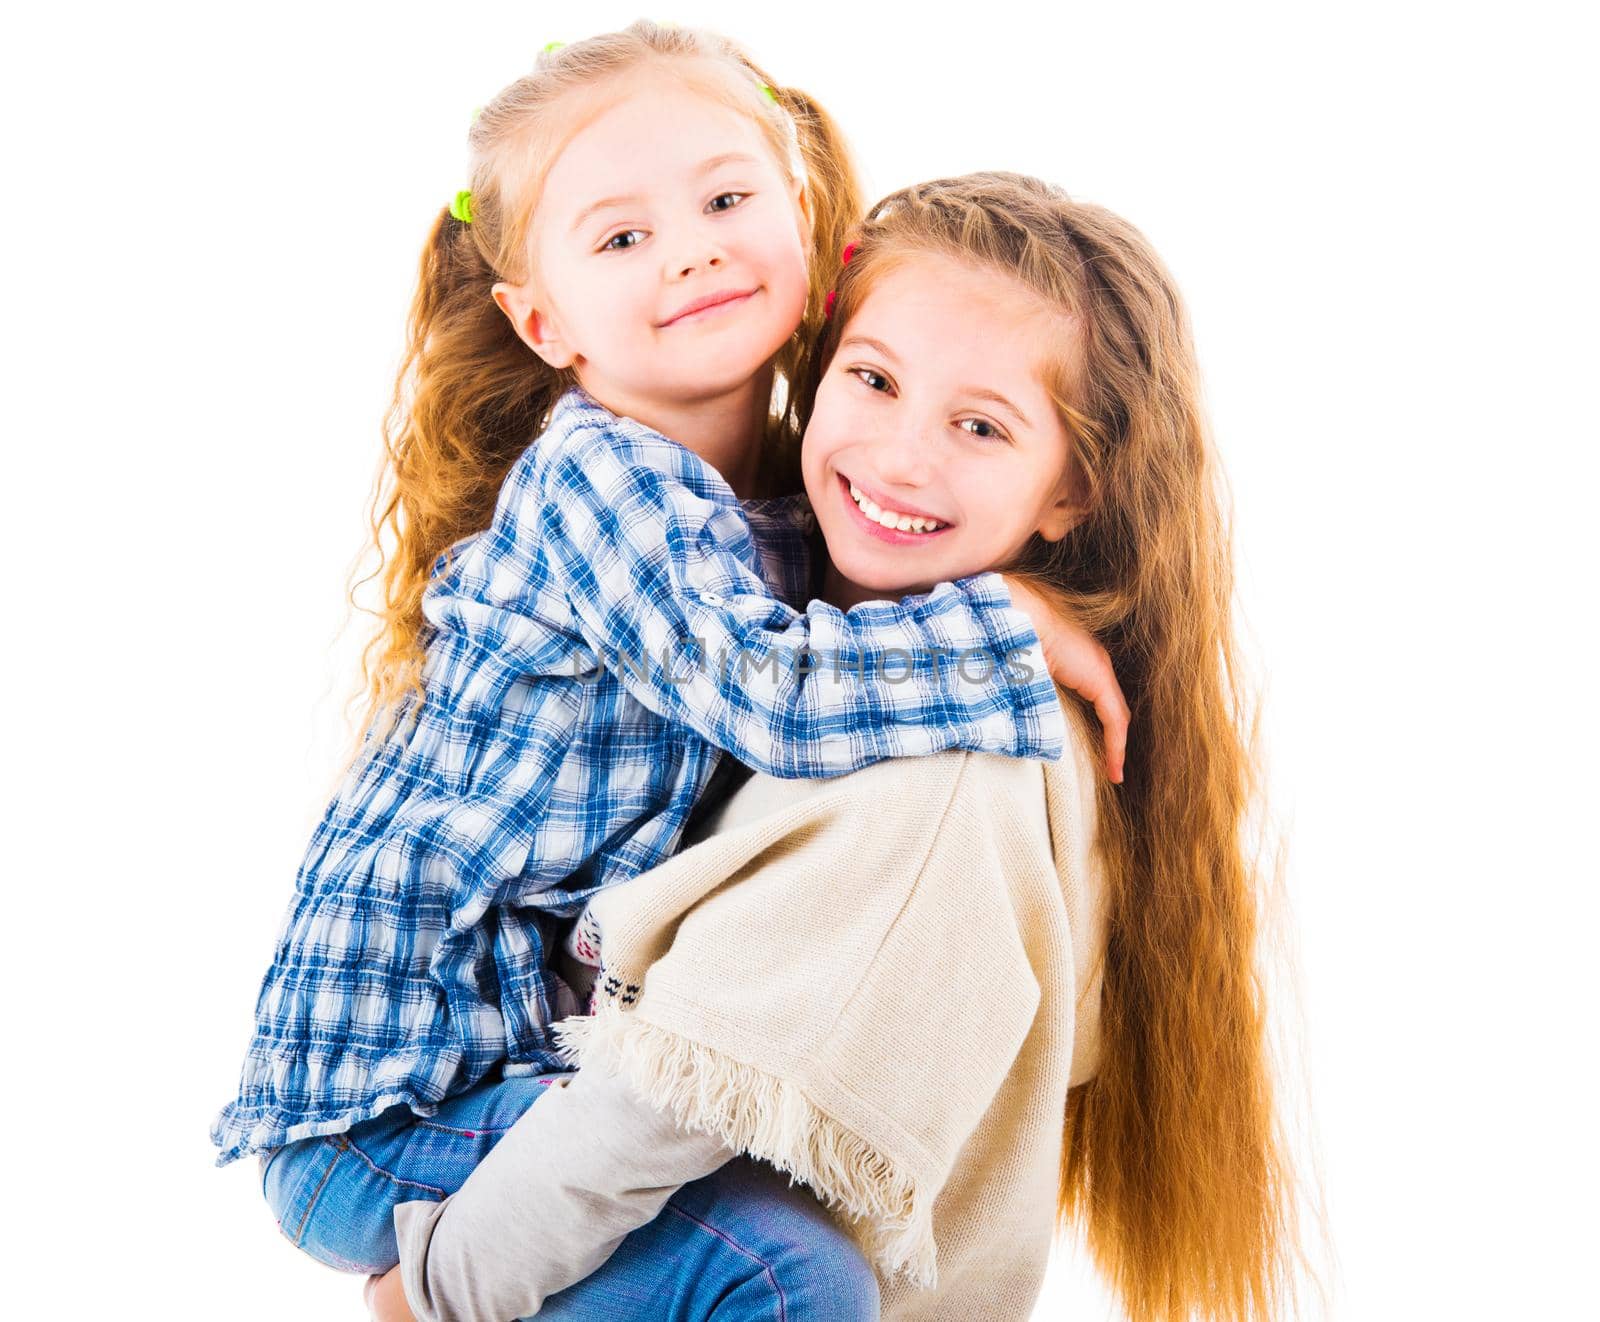 Young girl holding in her arms her little sister and hapilly looking at camera, isolated on white background